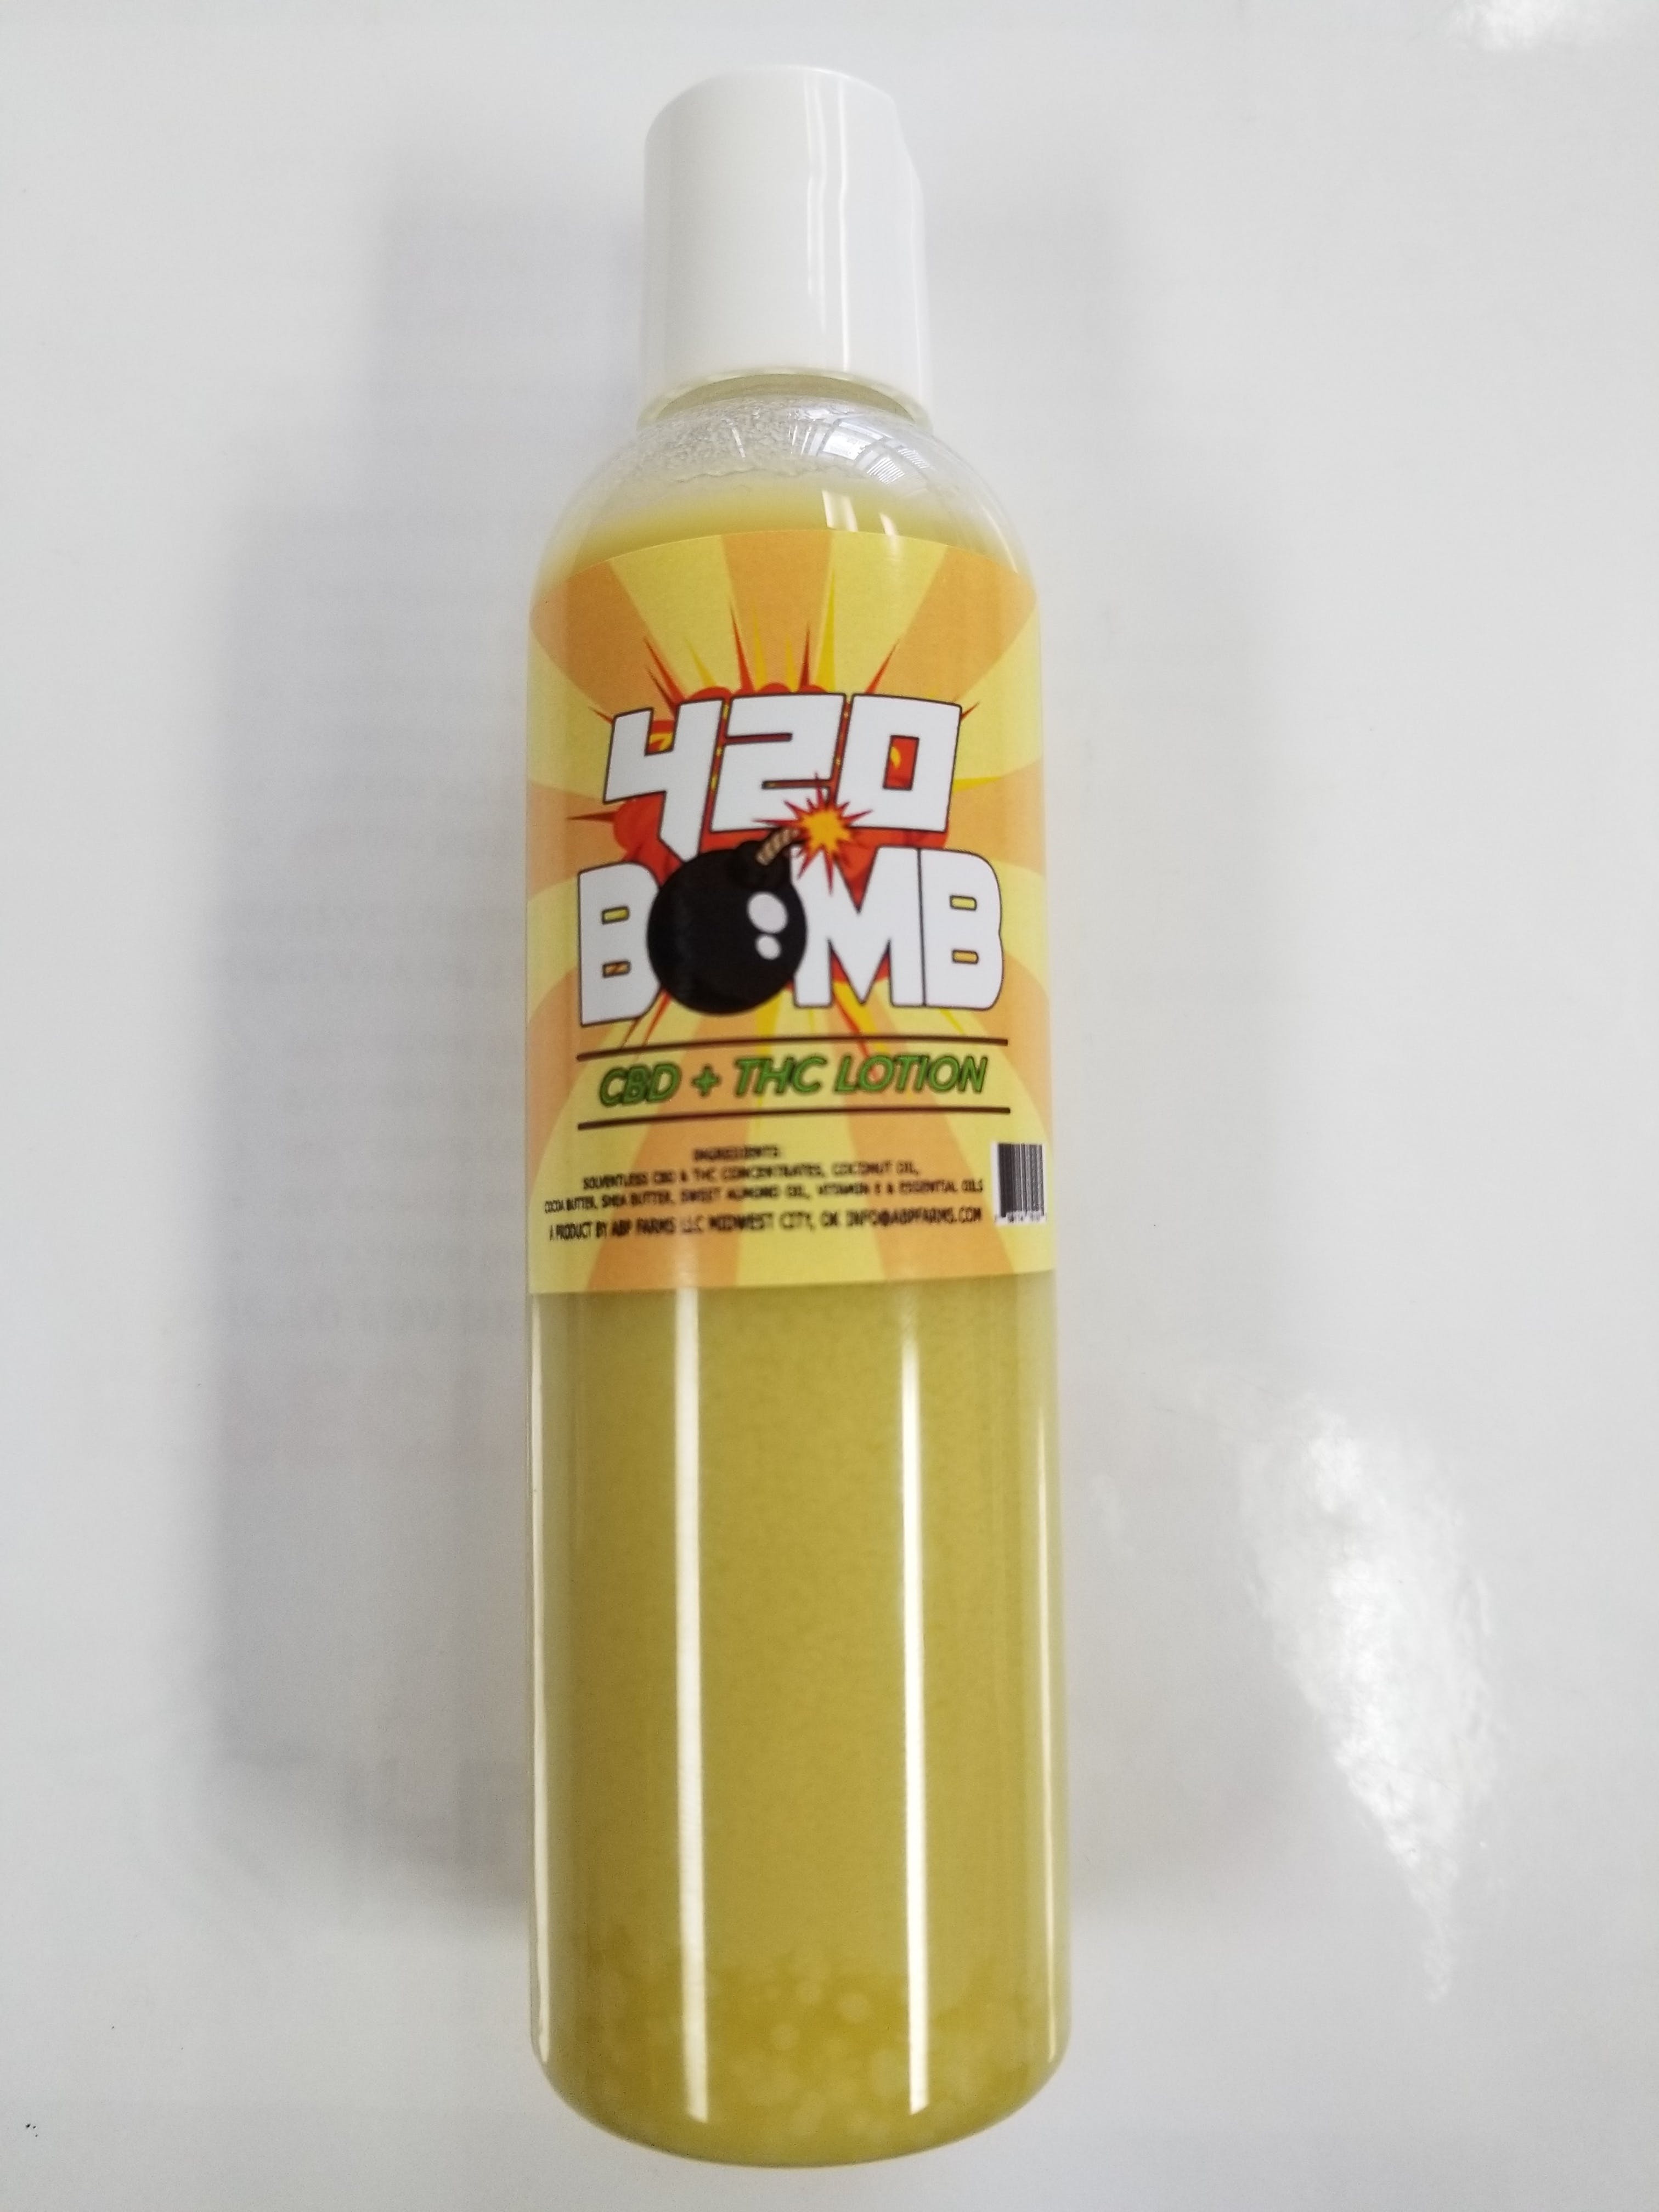 topicals-420-bomb-lotion